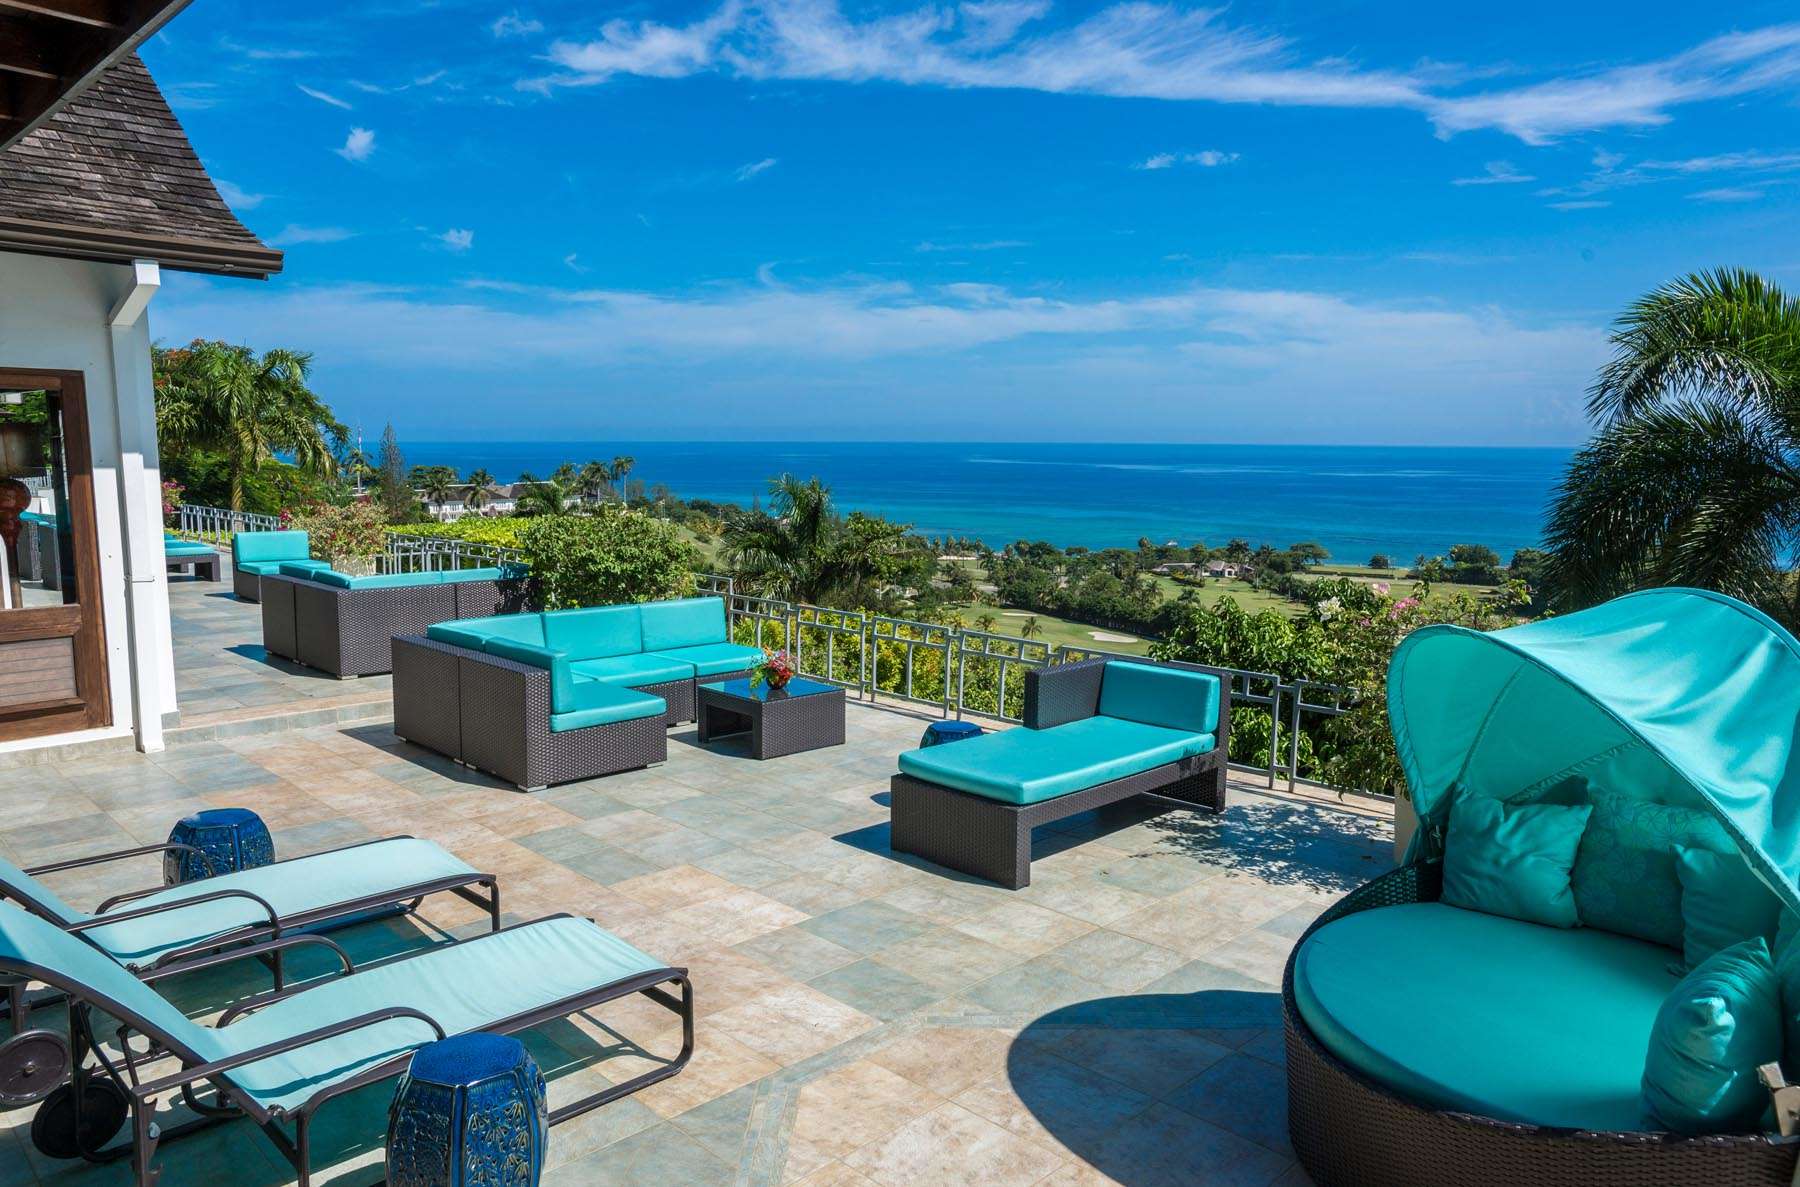 A patio with blue furniture and chairs overlooking the ocean.